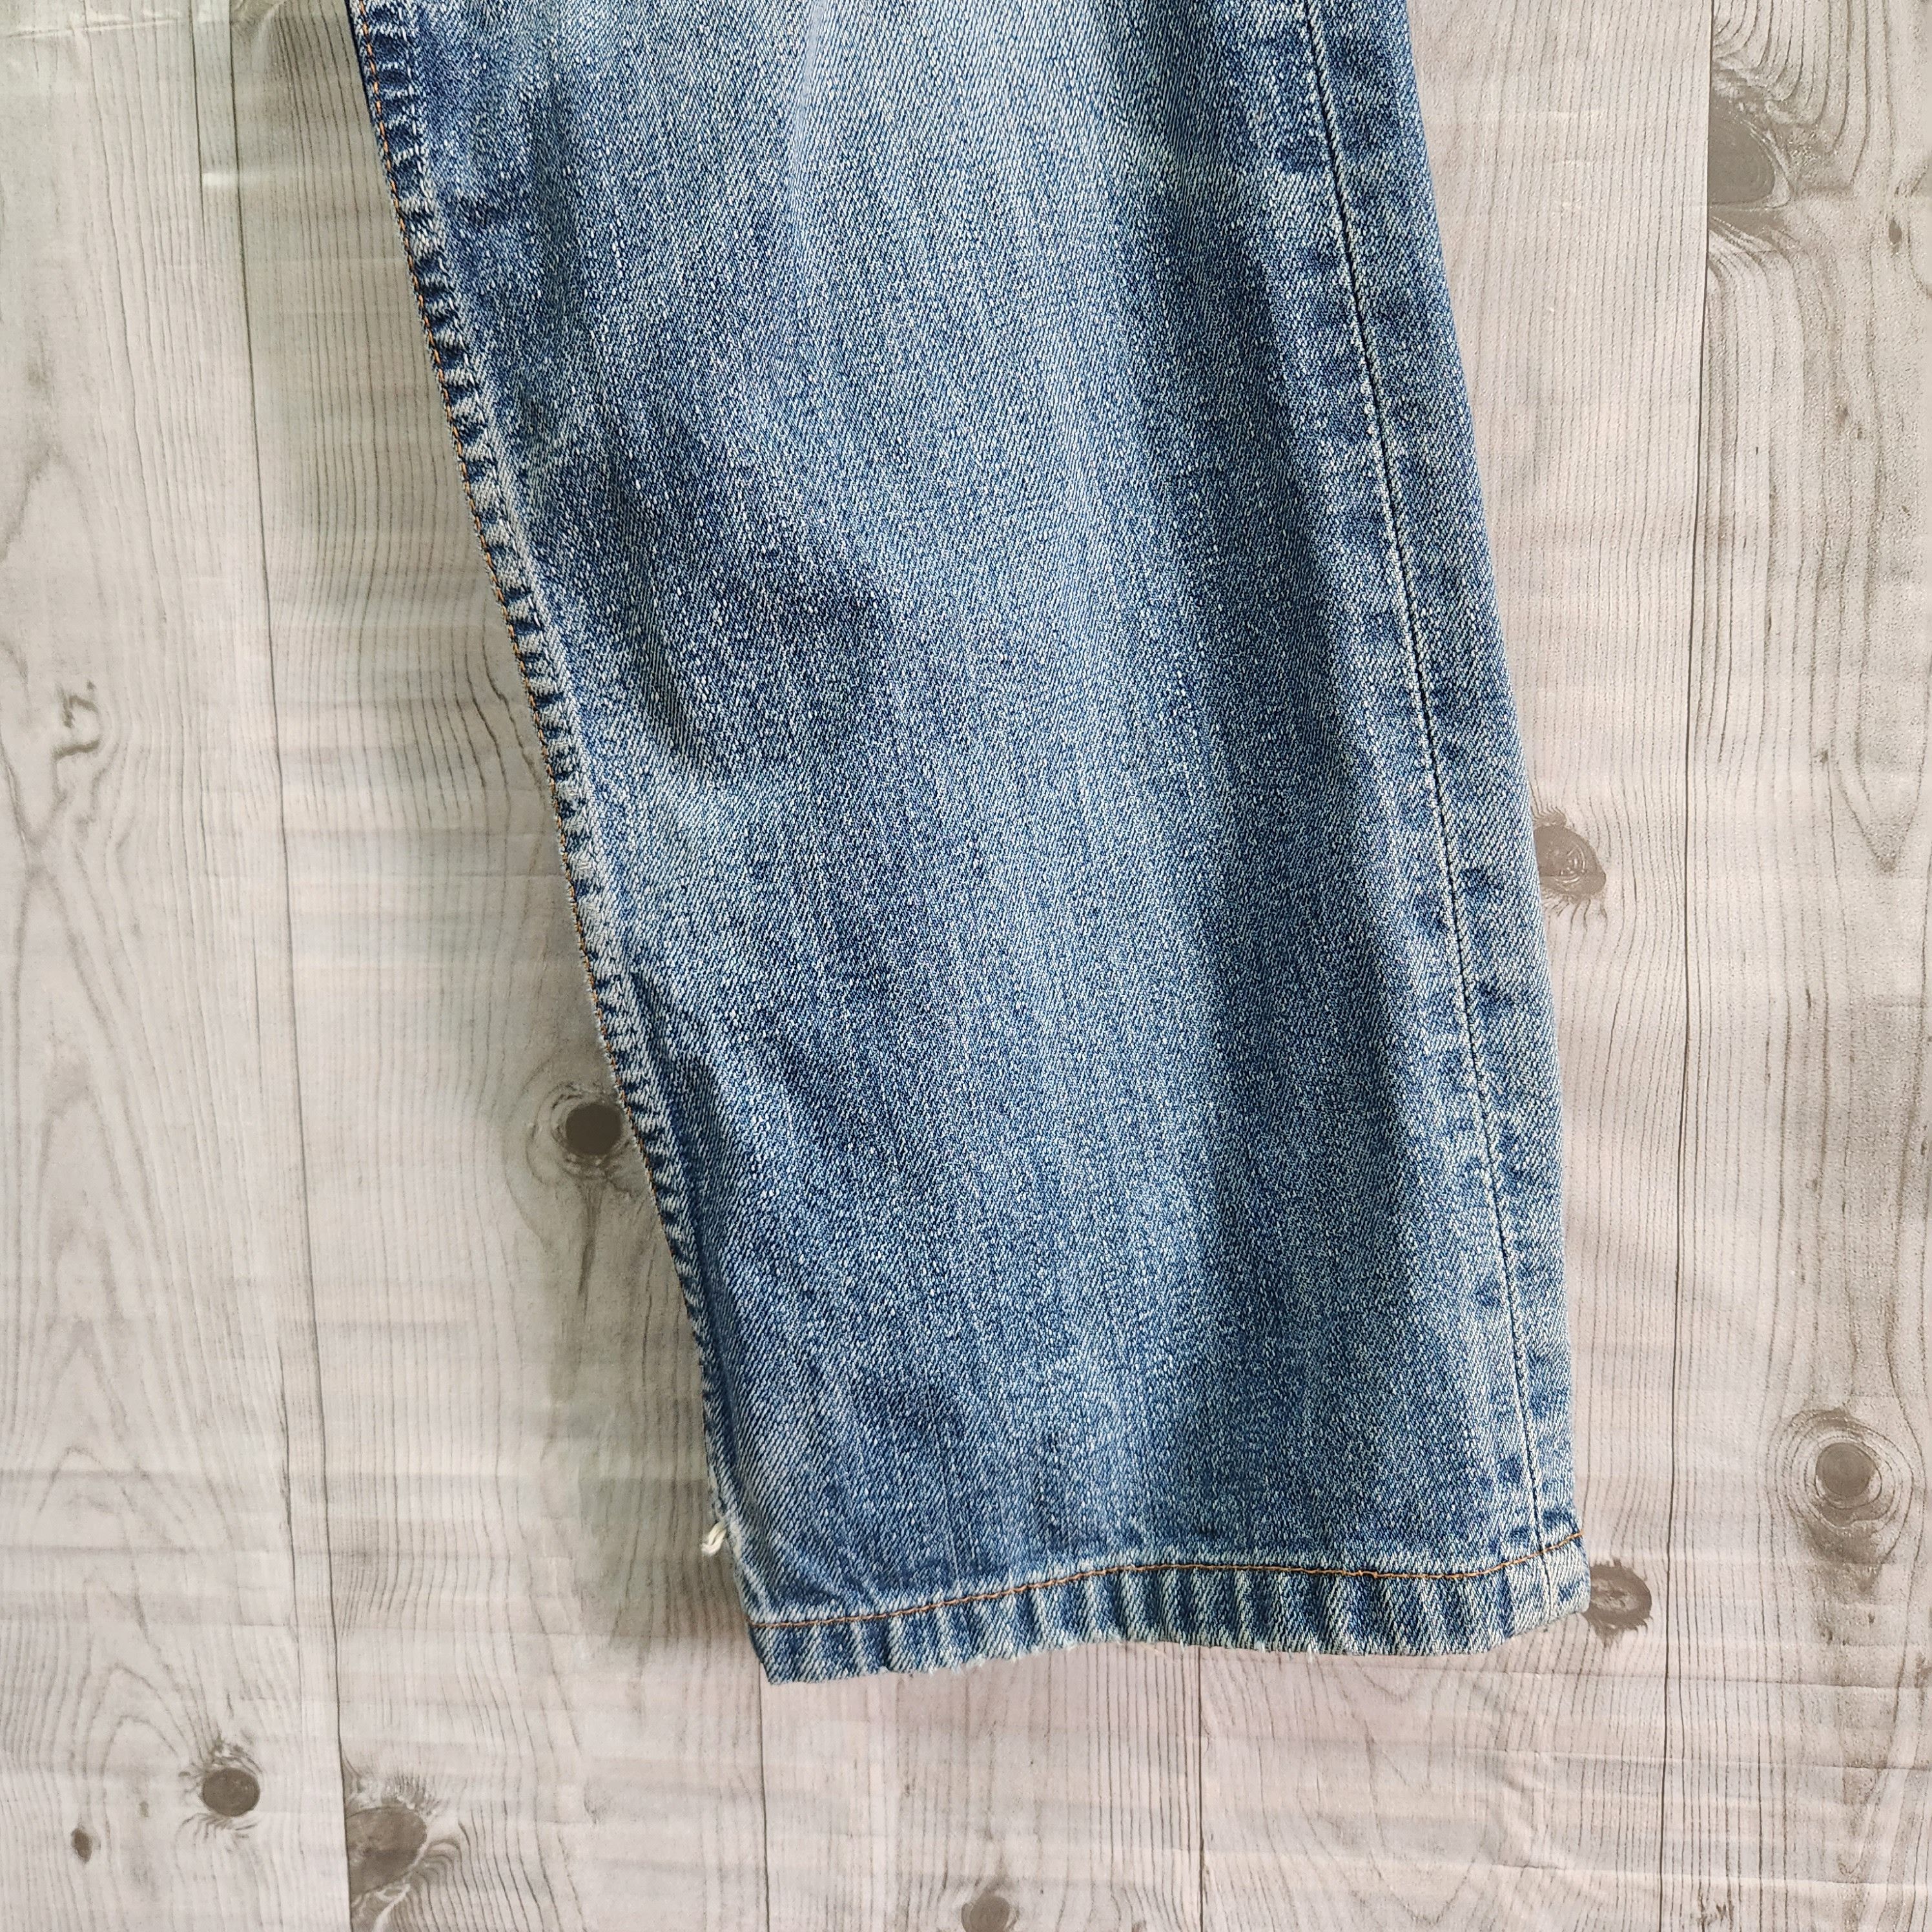 Levis 502 Vintage Distressed Ripped Denim Jeans Year 2002 - 7